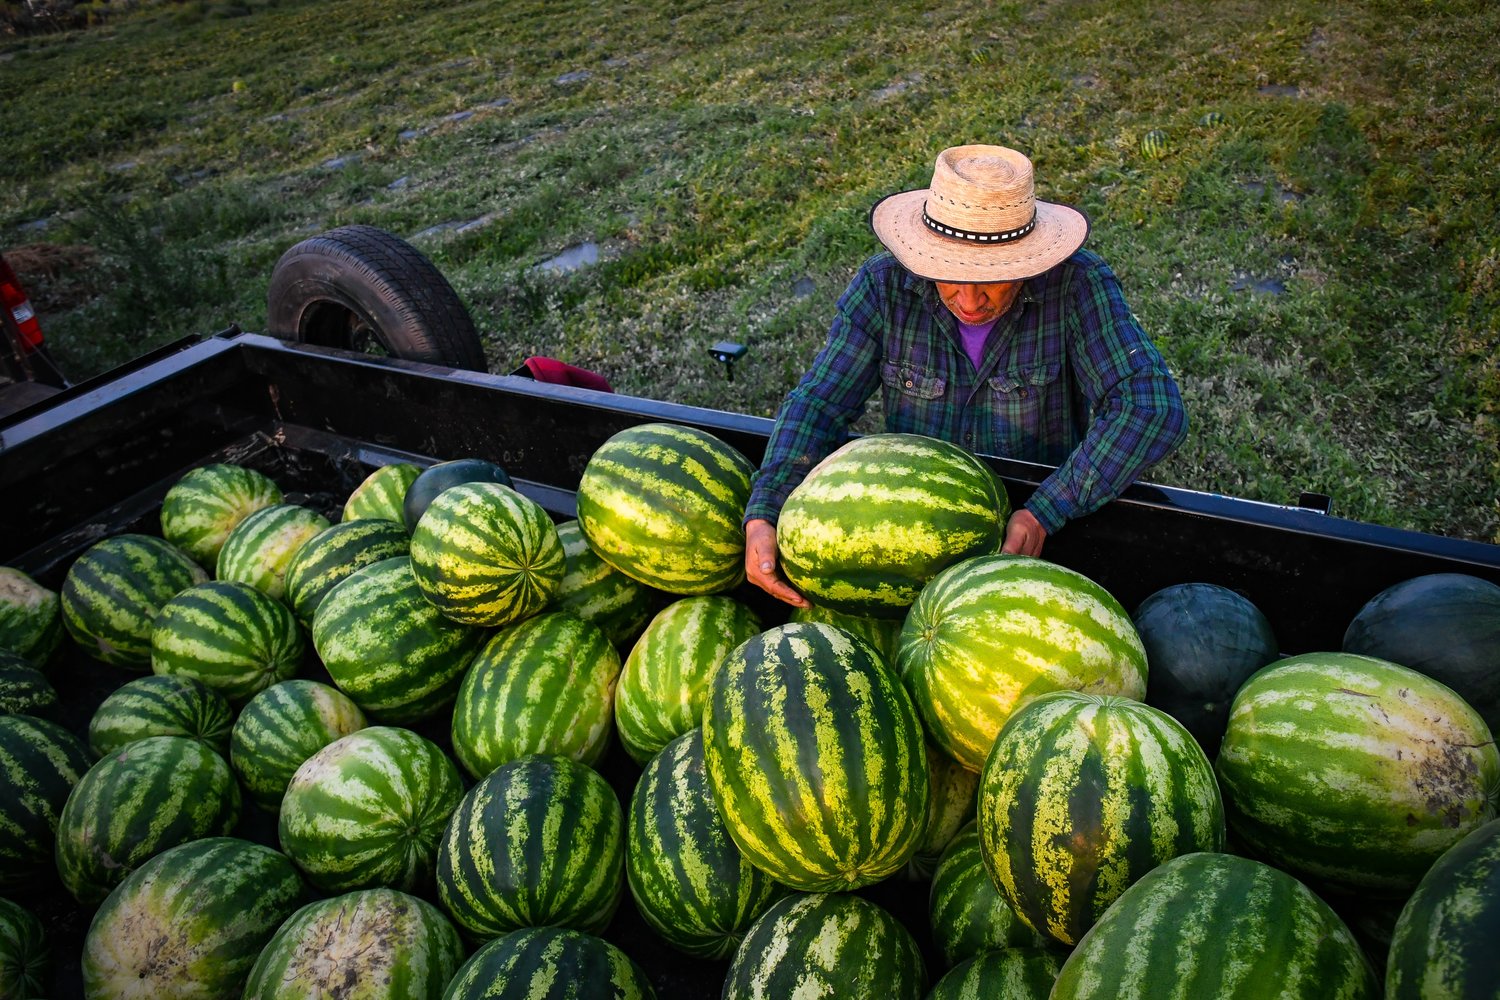 Magdaleno Pone places a watermelon in the trailer during the early morning harvest at Harvey Gap Melons near Silt, Colo on August 31, 2021.